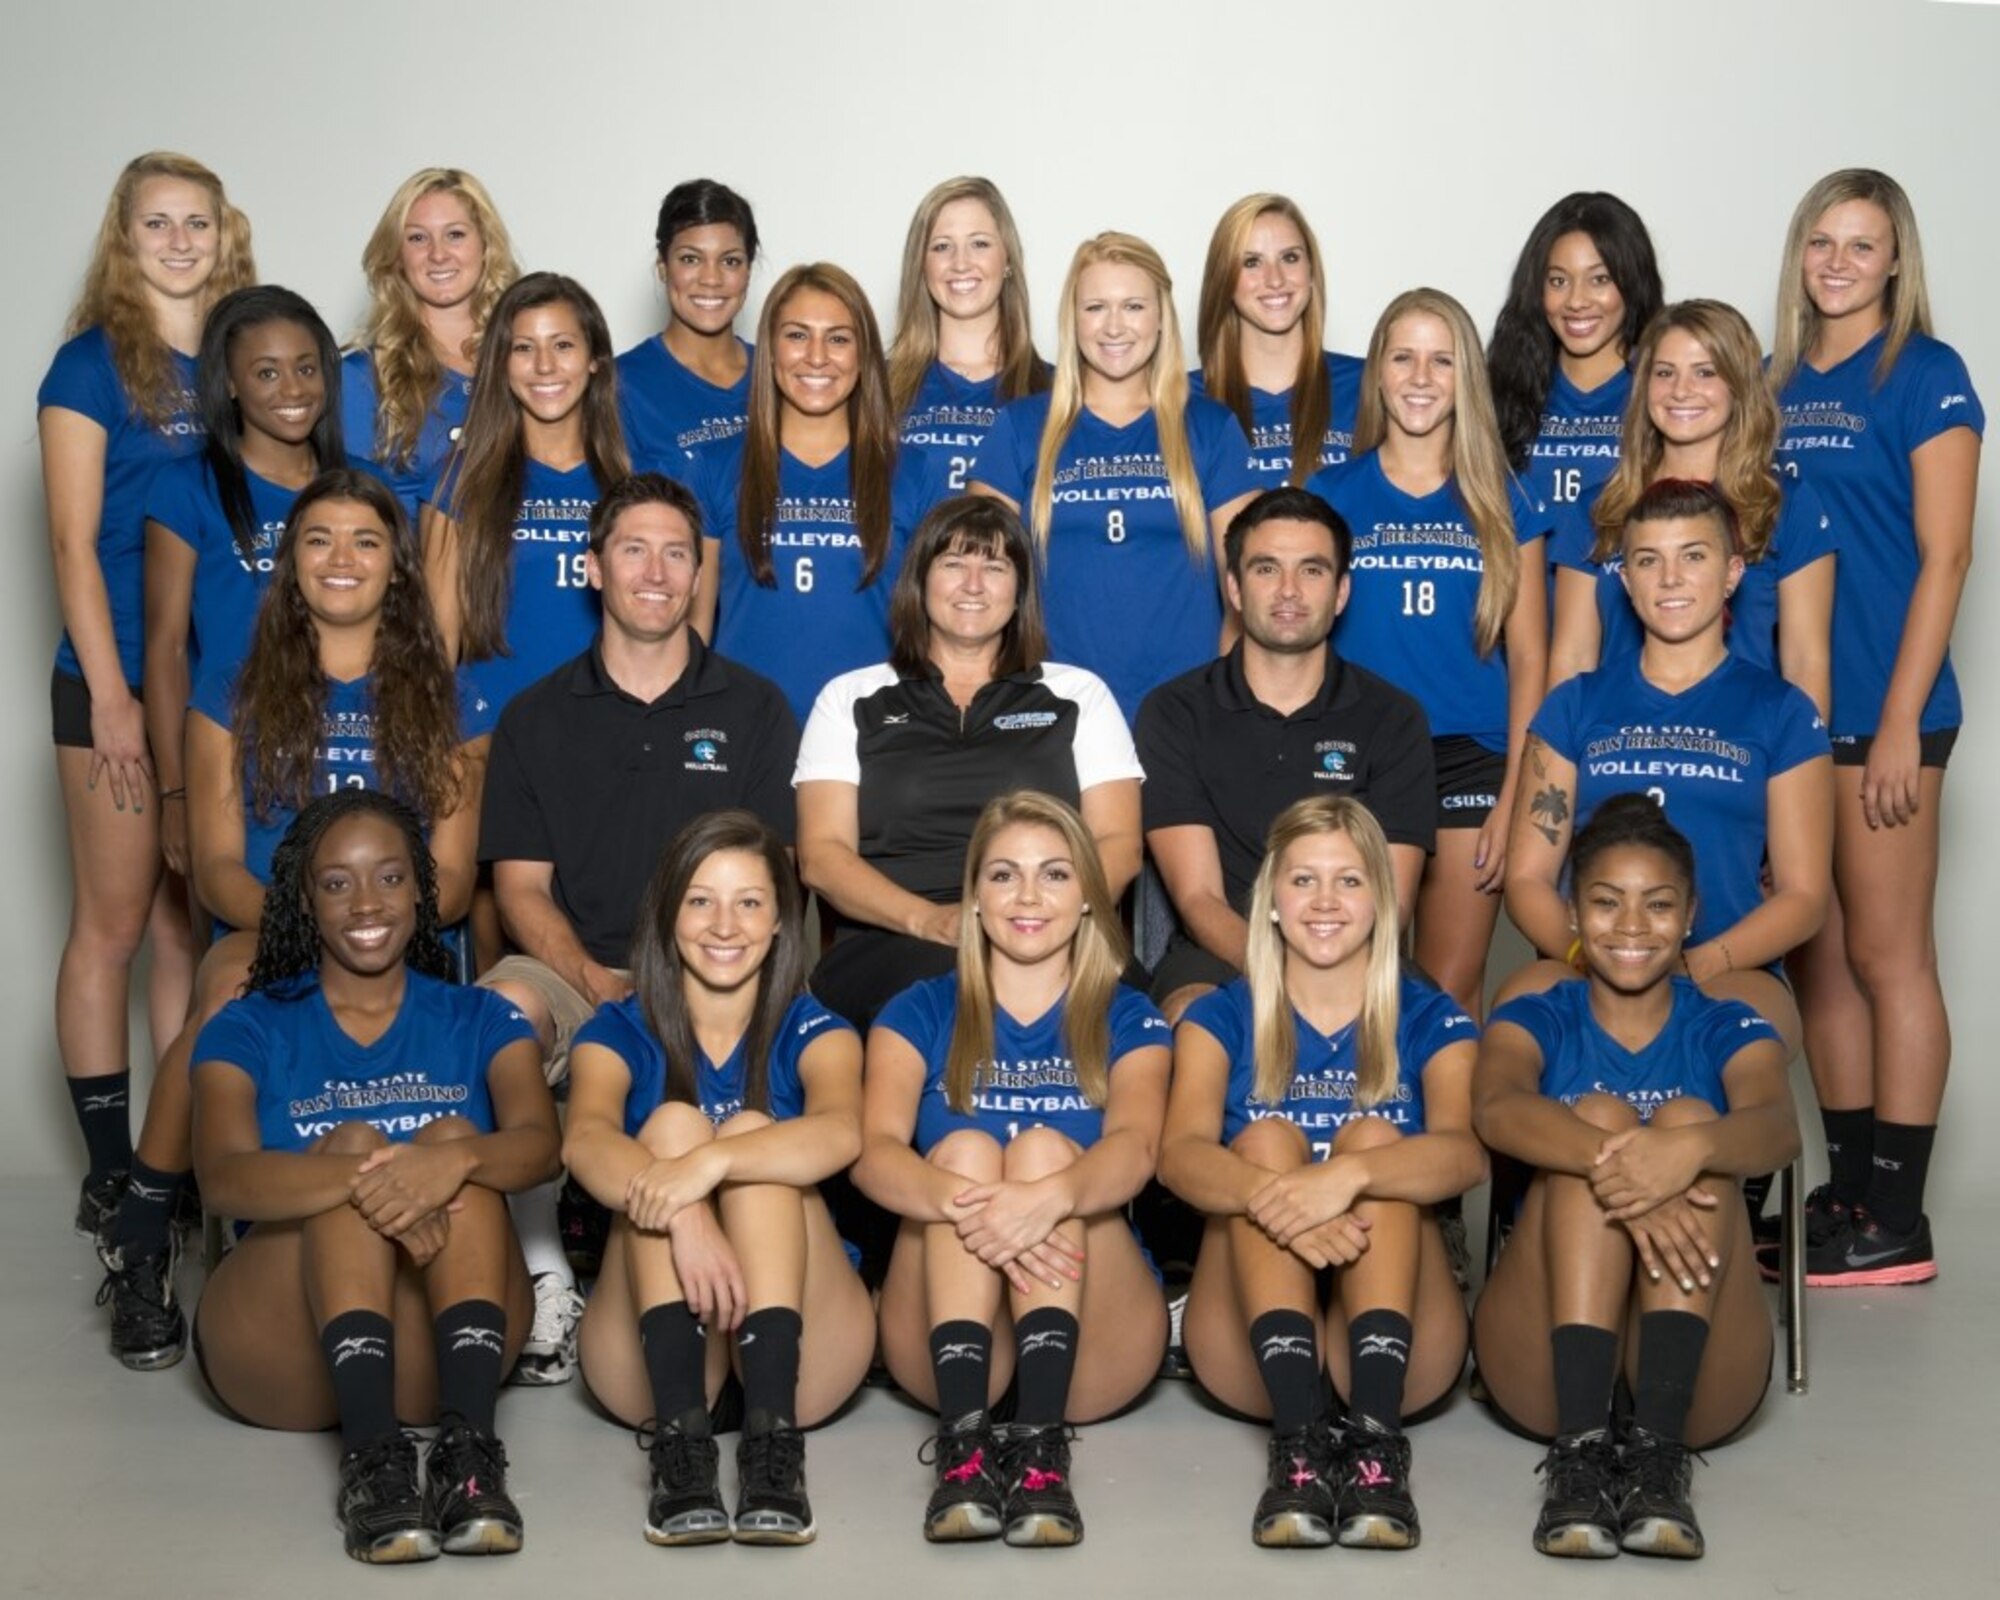 Senior Airman Jade Cairns (bottom right), 60th Diagnostics and Therapeutics Squadron medical laboratory technician, poses for a team photo for her 2012 roster at California State University San Bernardino. Cairns joined the Air Force in 2016 and was accepted to play on the 2019 Air Force Women's Volleyball Team. (courtesy photo)